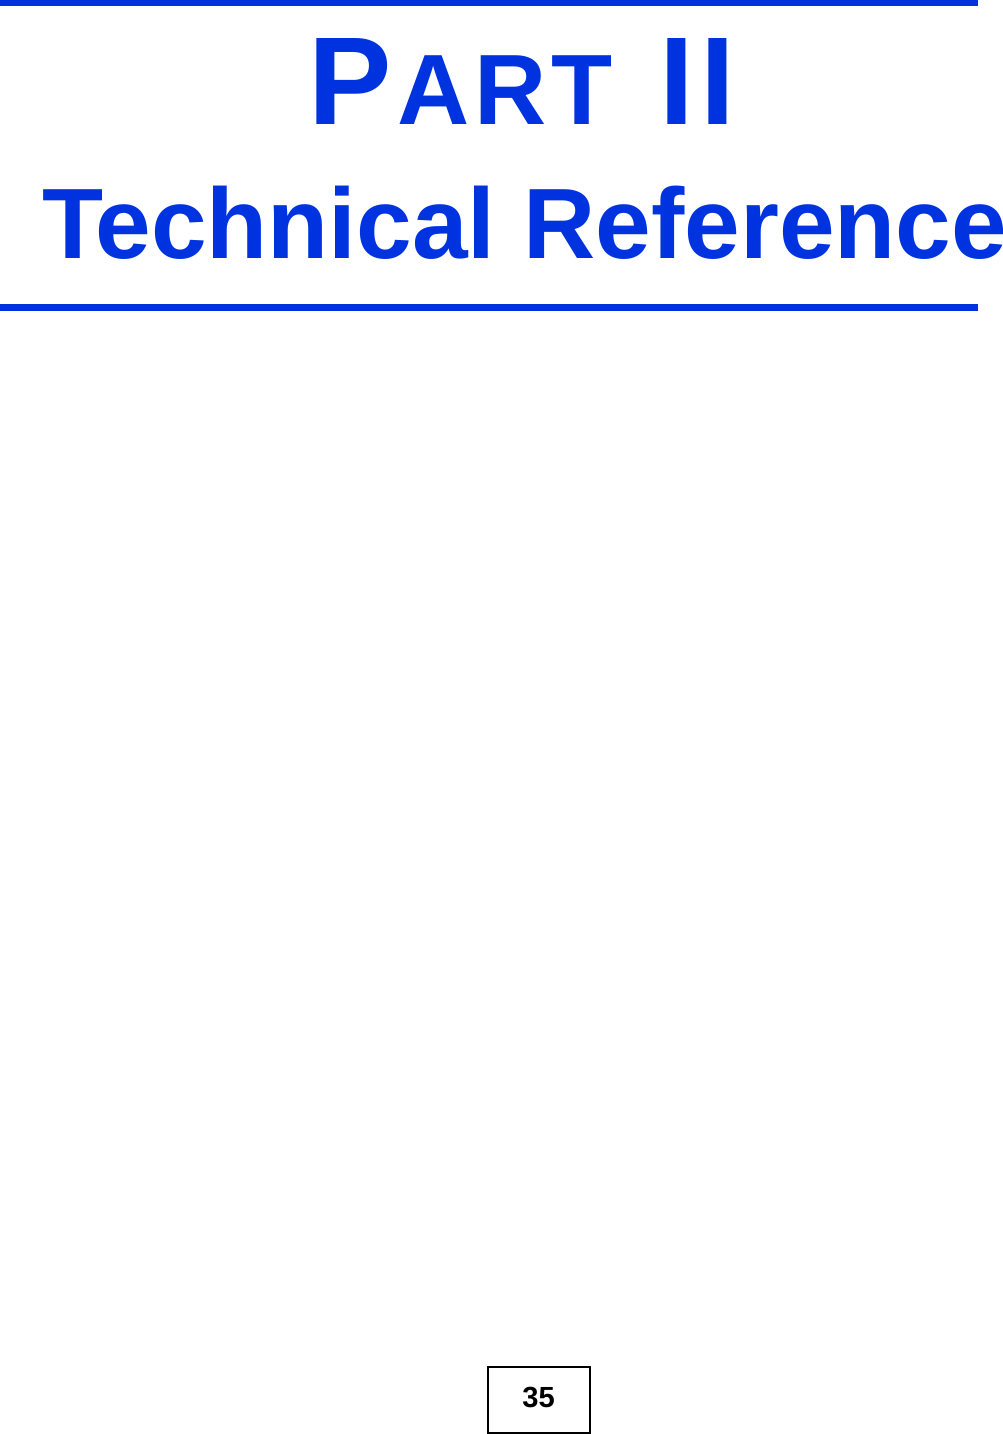 35PART IITechnical Reference